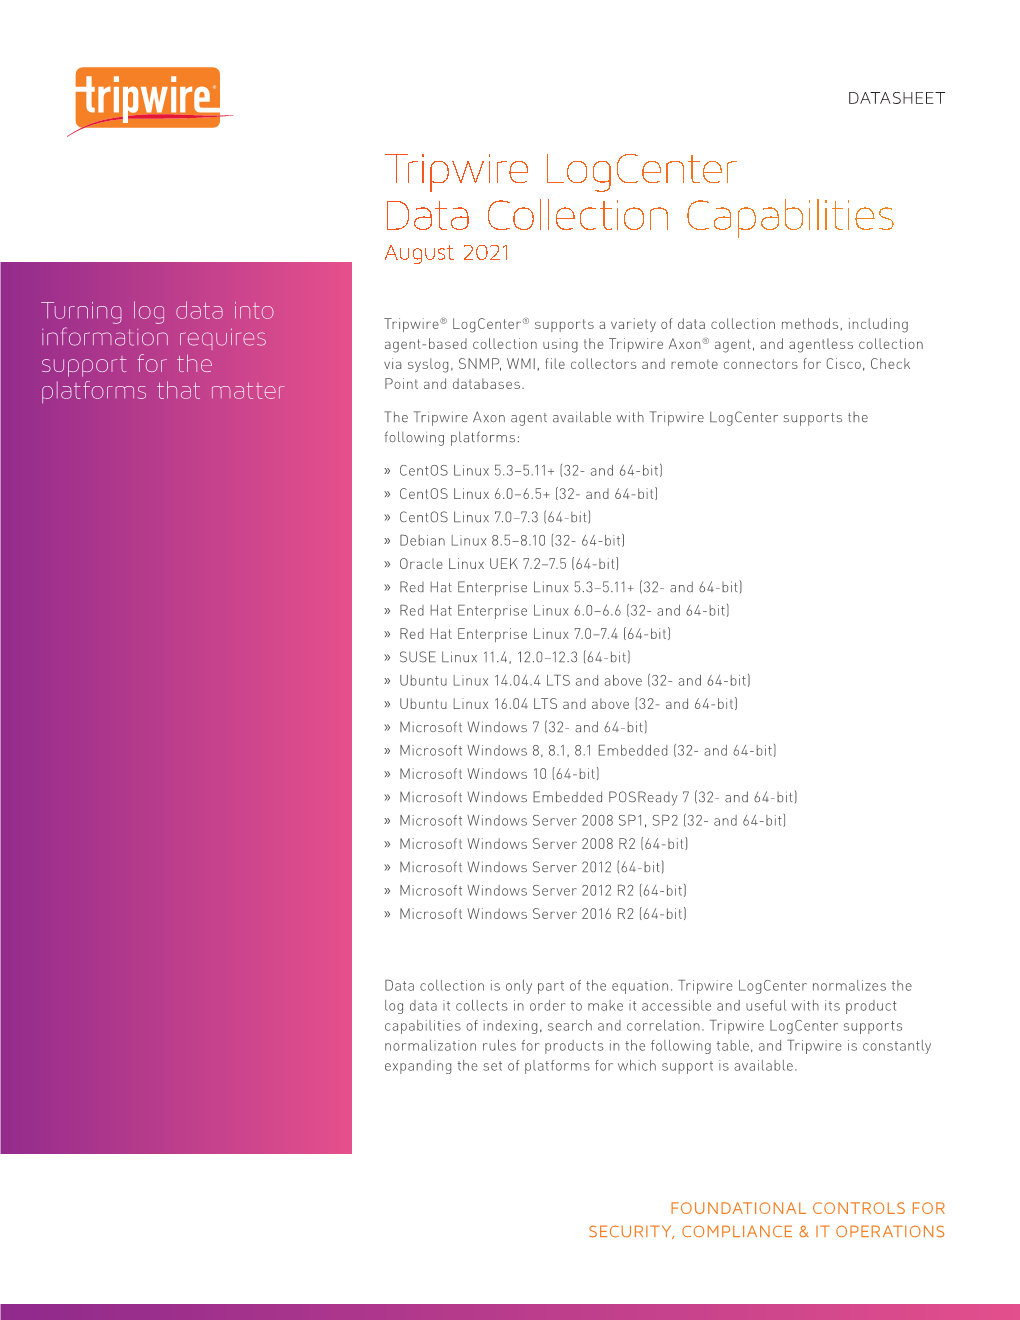 Tripwire Logcenter Data Collection Capabilities August 2021